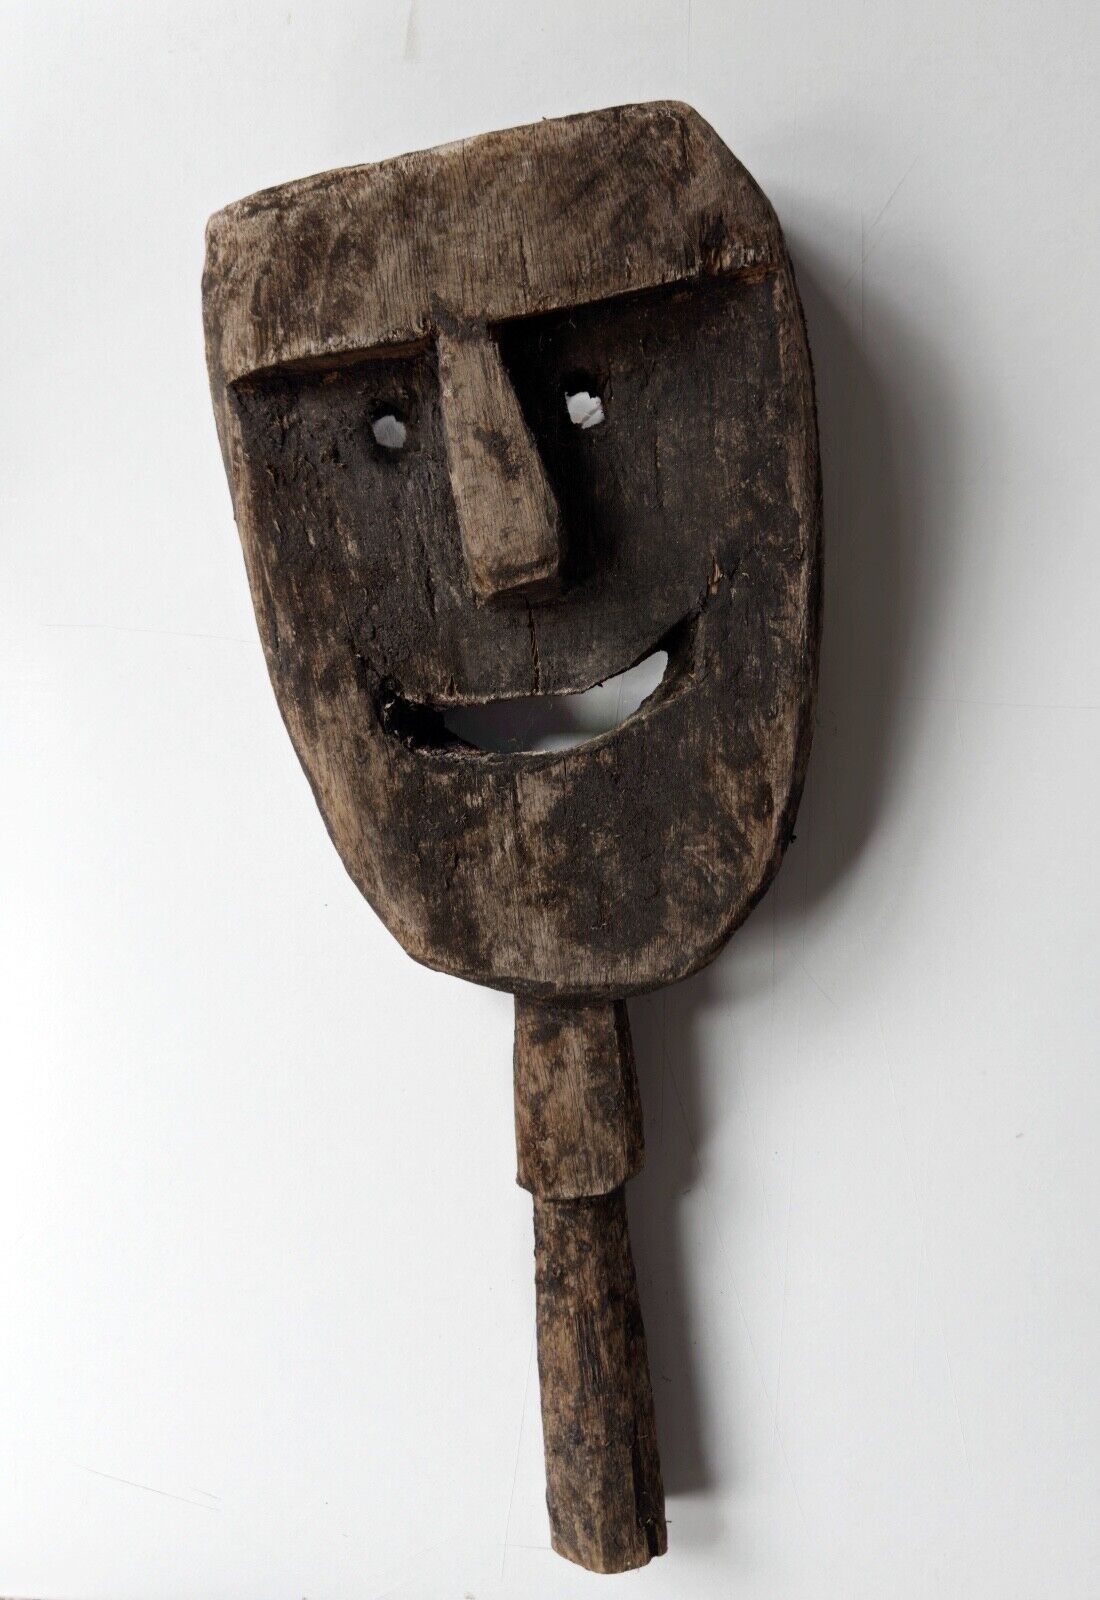 Vintage Wooden Hand Carved Tribal Mask - Tanna, Vanuatu Islands, South Pacific